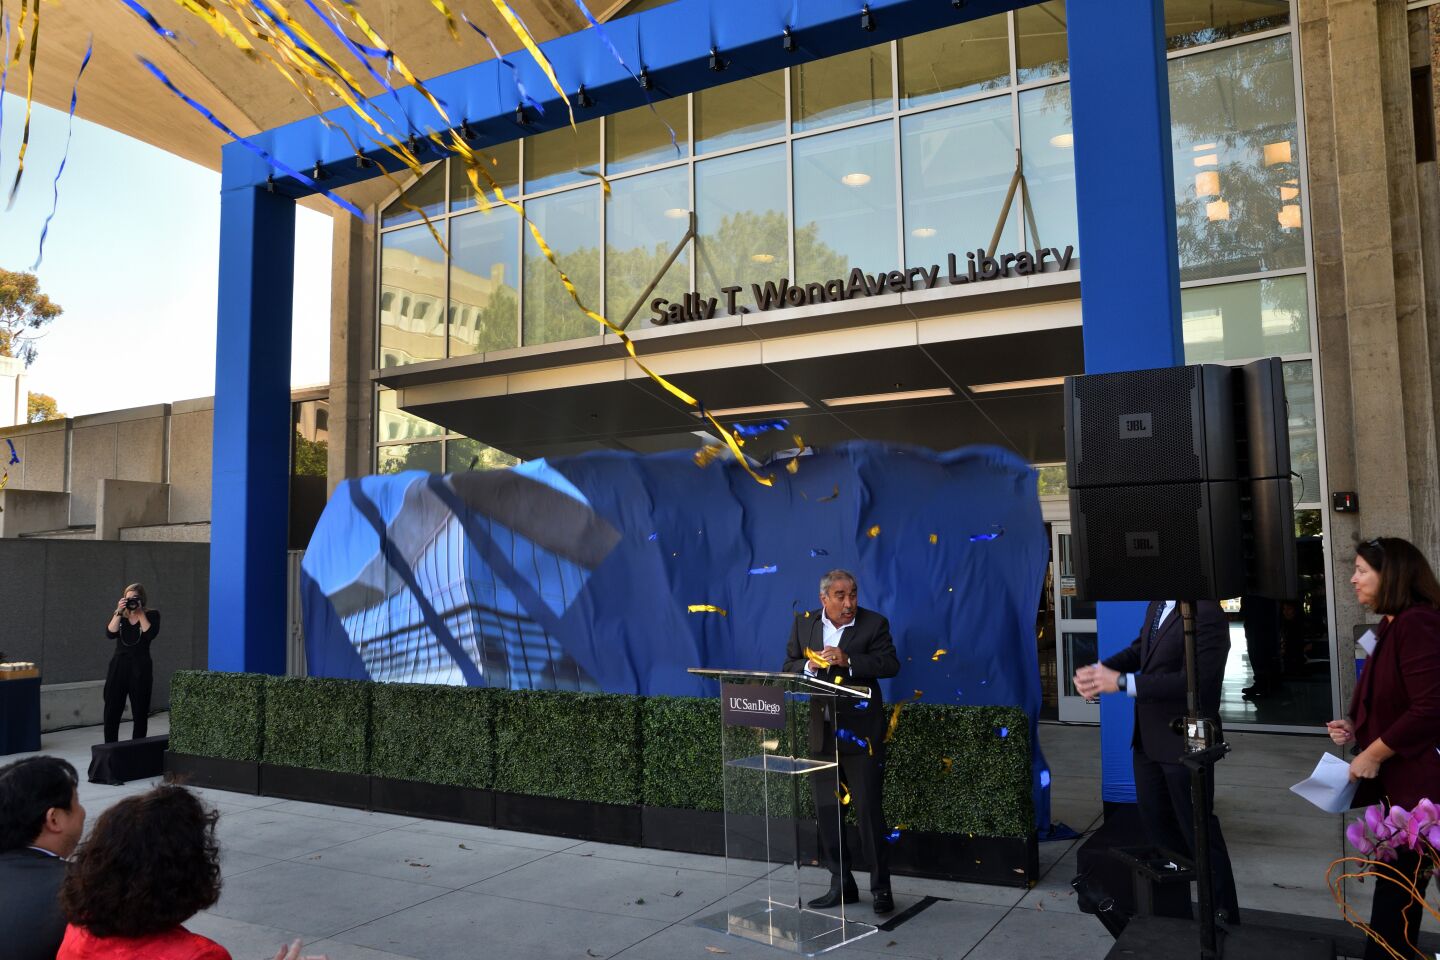 The curtain drops to reveal the newly dedicated Sally T. WongAvery Library, the former Biomedical Library at UC San Diego in La Jolla.